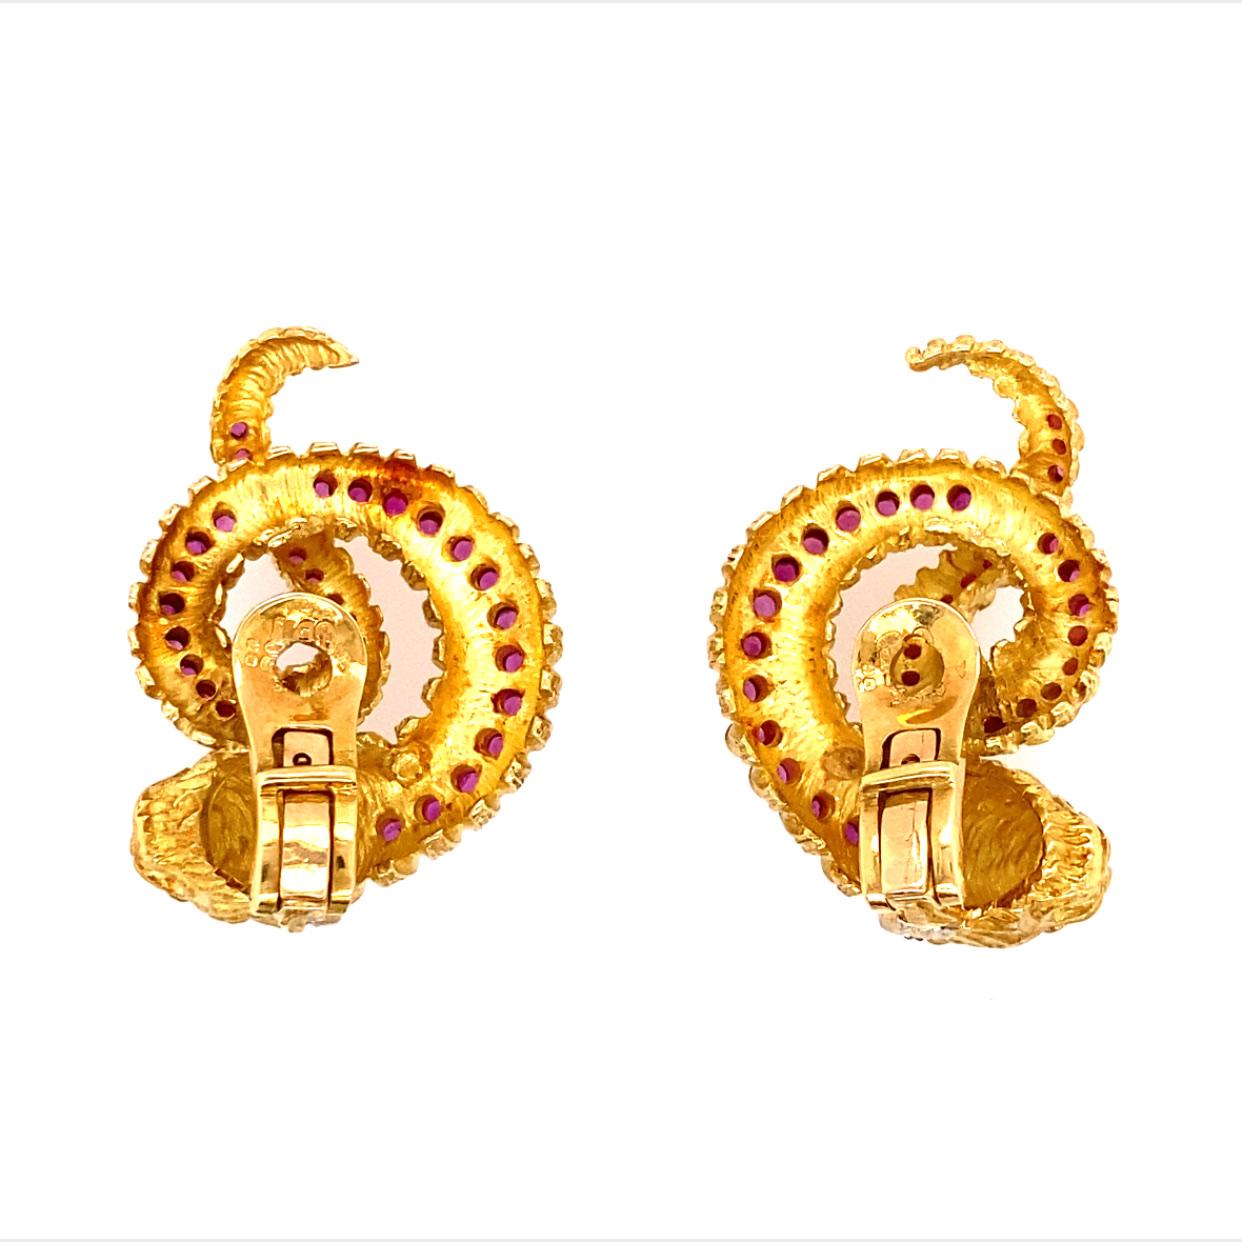 Ilias Lalaounis  Vintage clip-on Chimera earrings in 18-karat yellow gold with rubies and diamonds.
Measurements 23.44 mm x 33 mm 